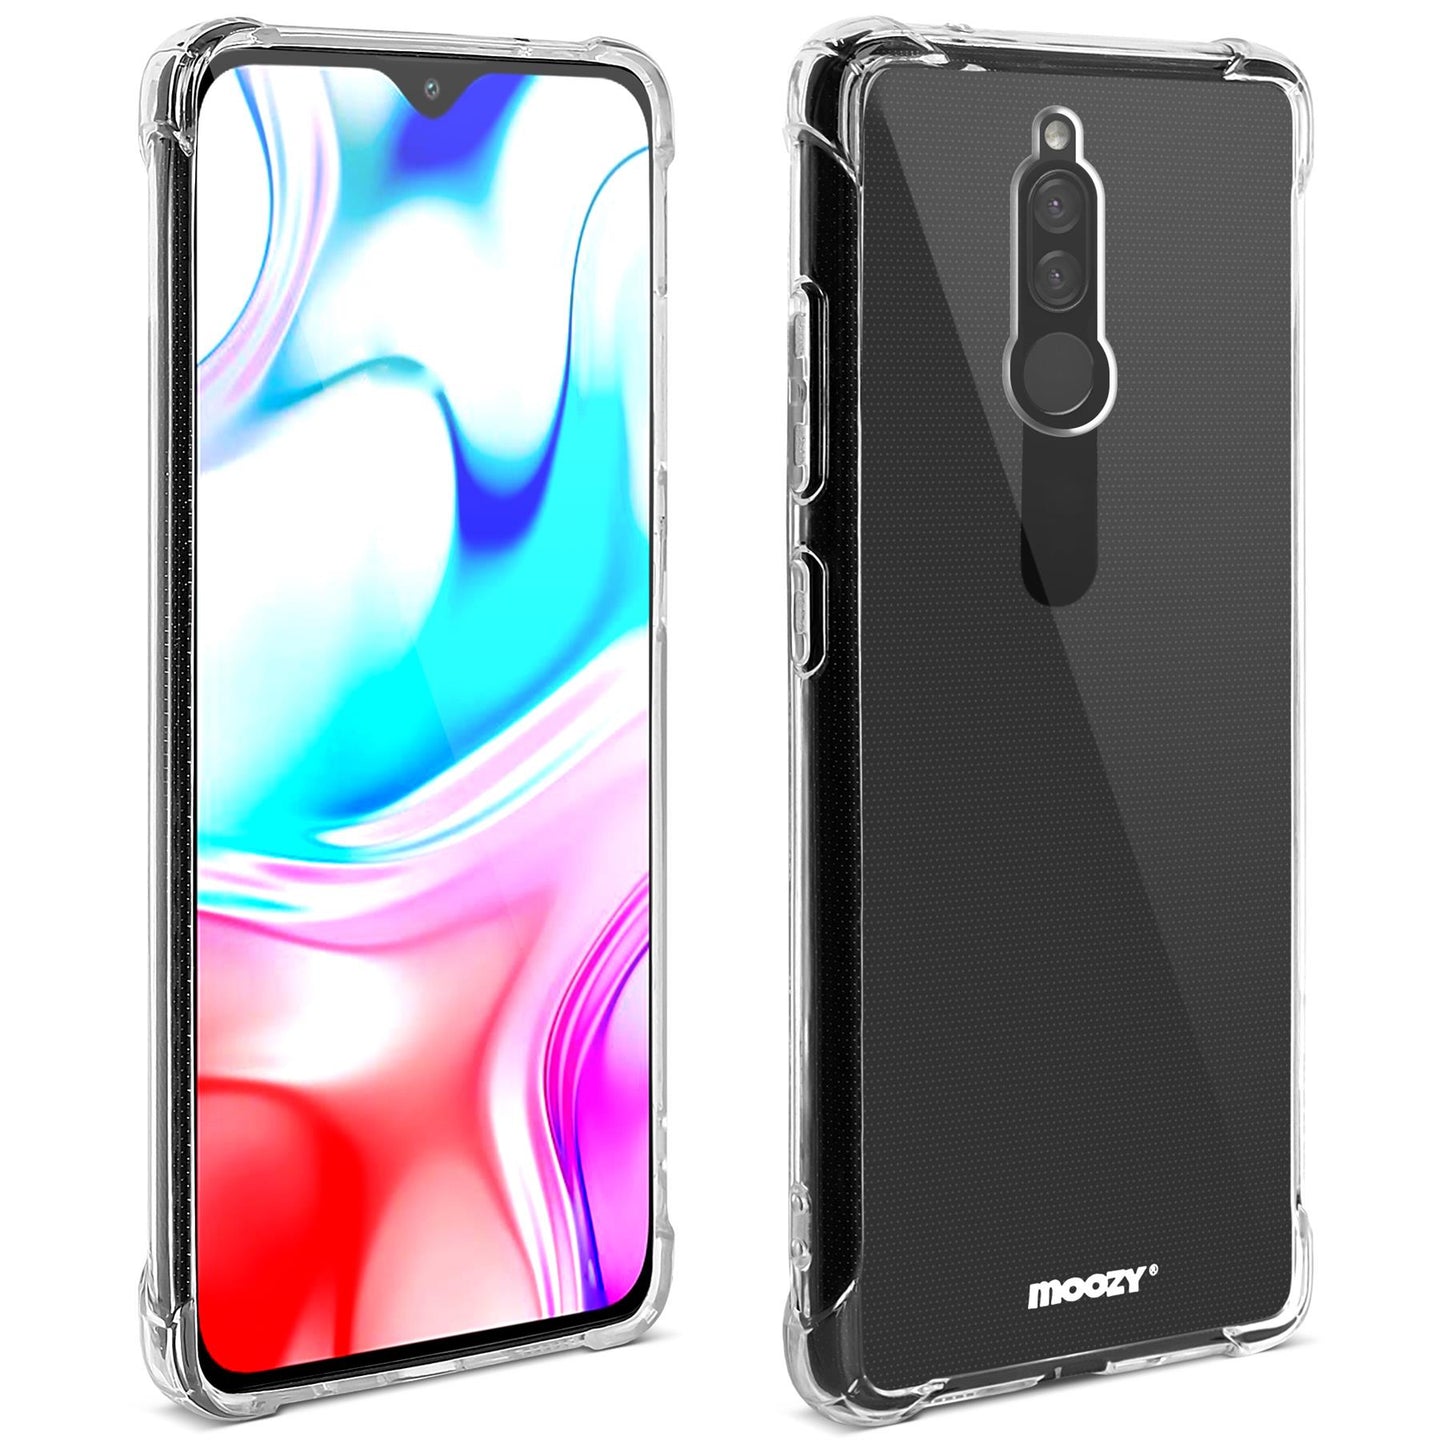 Moozy Shock Proof Silicone Case for Xiaomi Redmi 8 - Transparent Crystal Clear Phone Case Soft TPU Cover